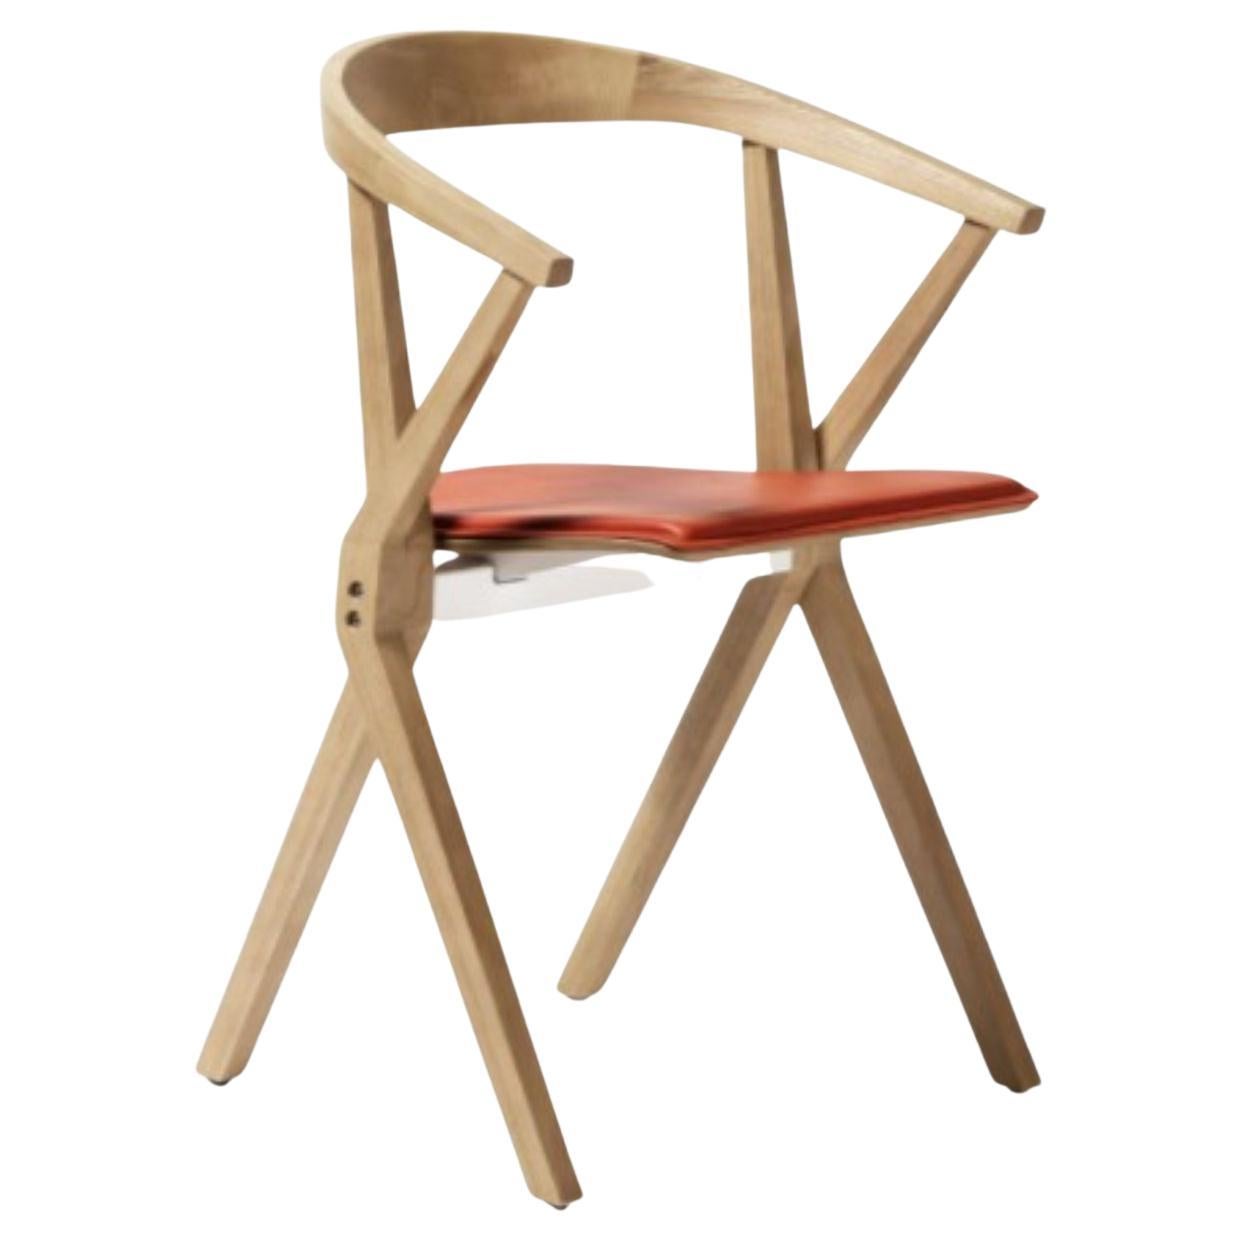 Chair B Orange Lacquered Ash by Konstantin Grcic